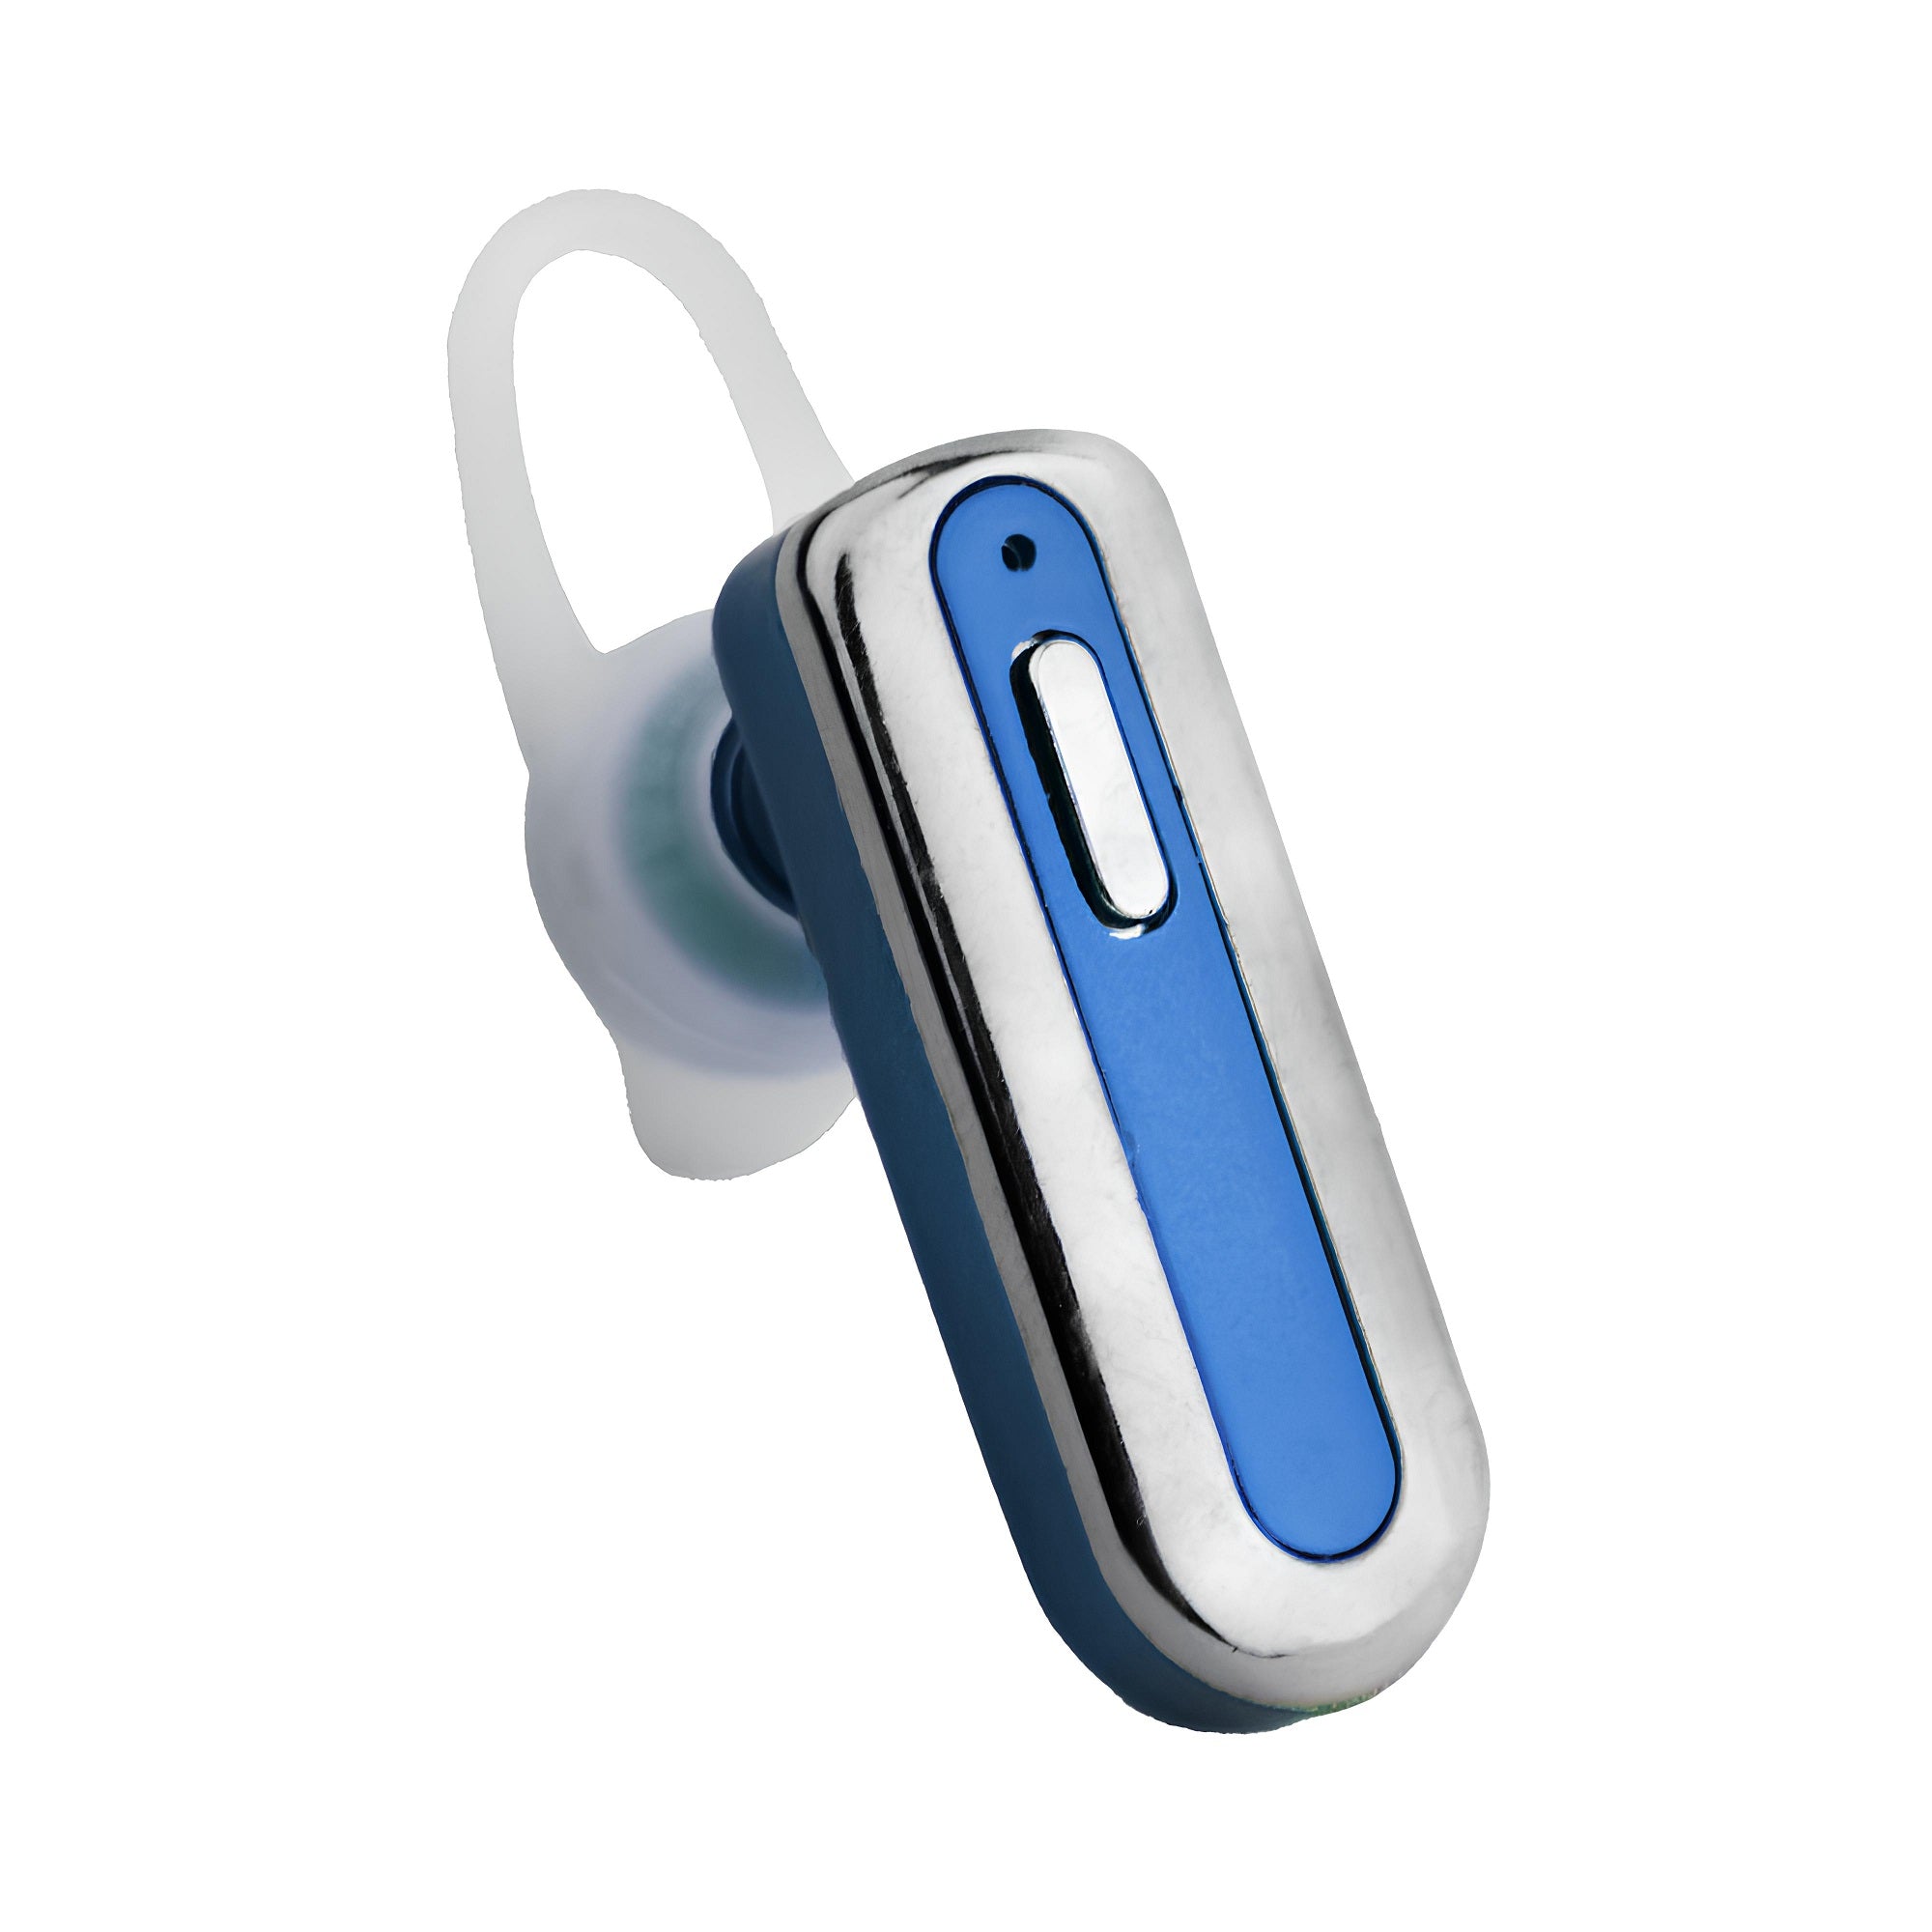 M11 Bluetooth Wireless Headset Right Ear Single Earbuds For phone & An –  gogomart.pk